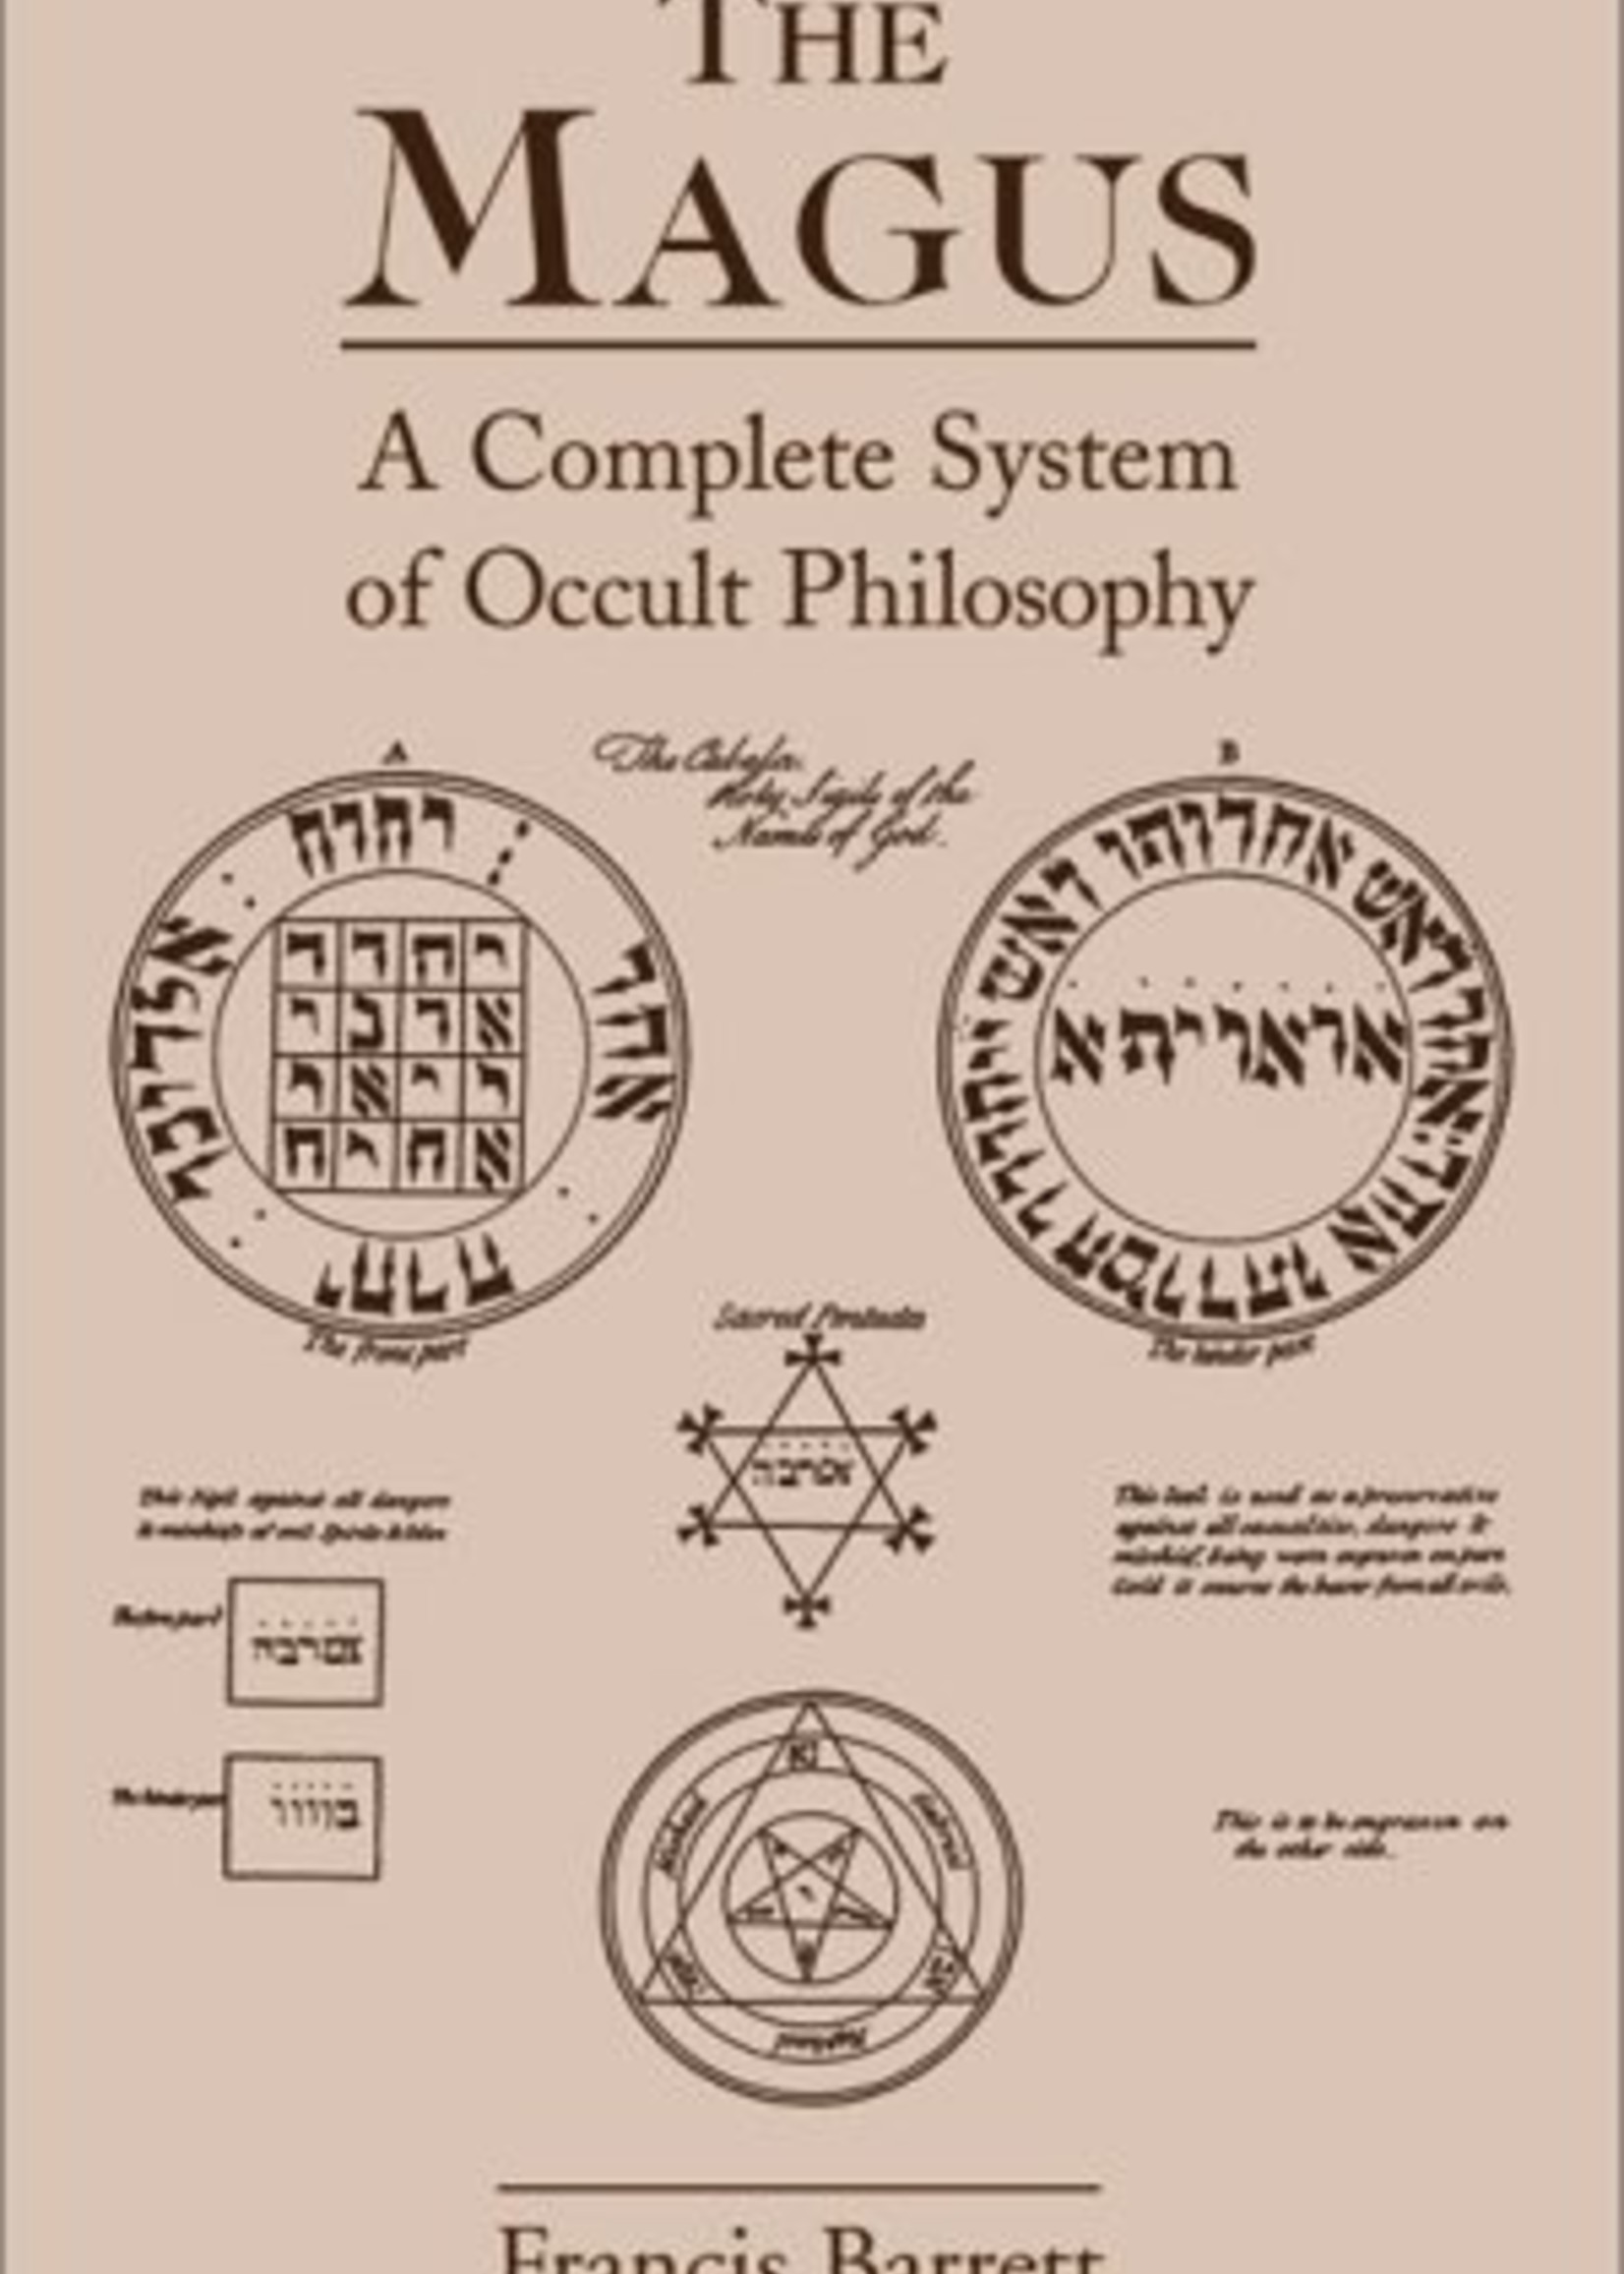 The Magus: A Complete System on Occult Philosophy